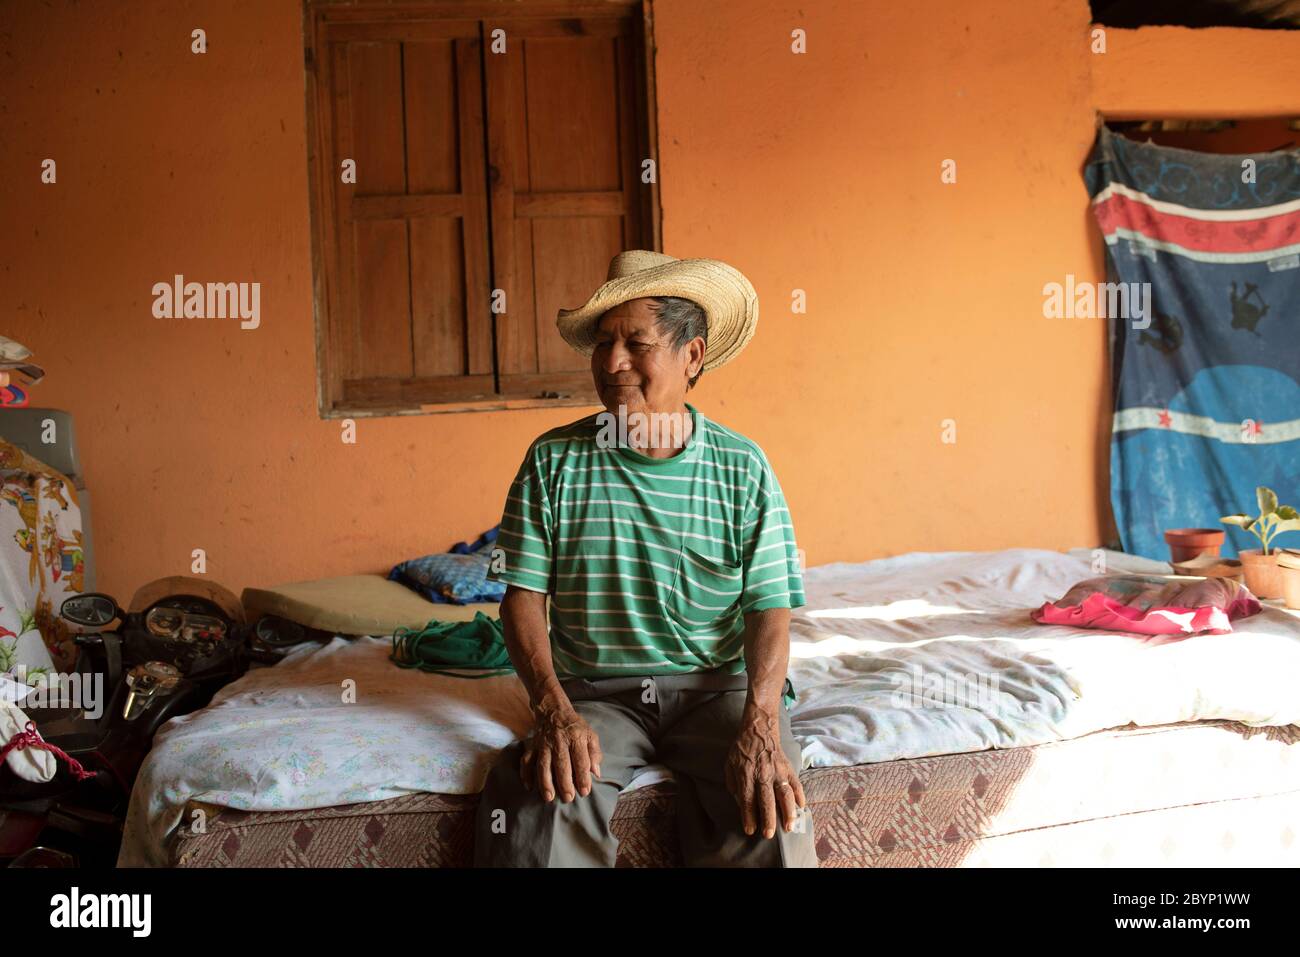 Portrait of latino man sitting on bed after siesta (afternoon nap). Everyday living in El Paredón, Guatemala. Dec 2018 Stock Photo